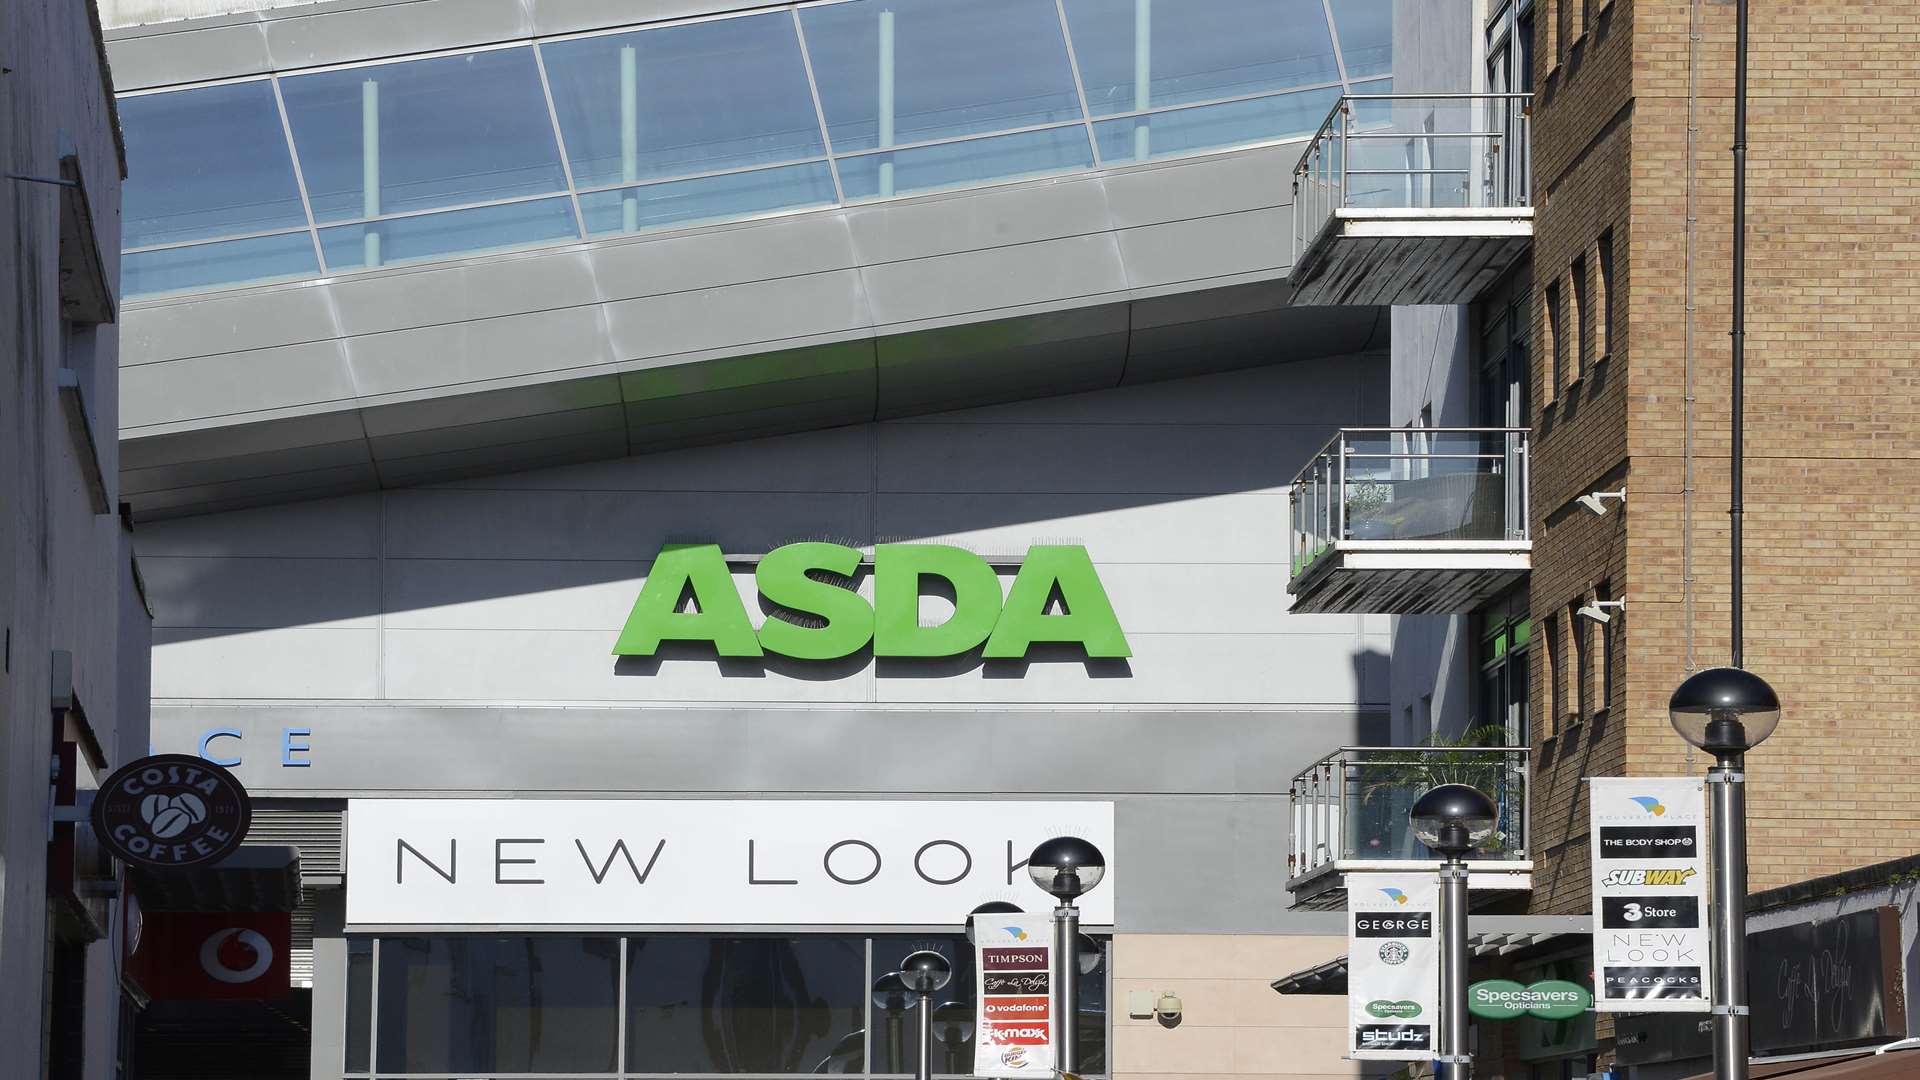 The Asda store in the Bouverie shopping centre in Folkestone, where the row took place.